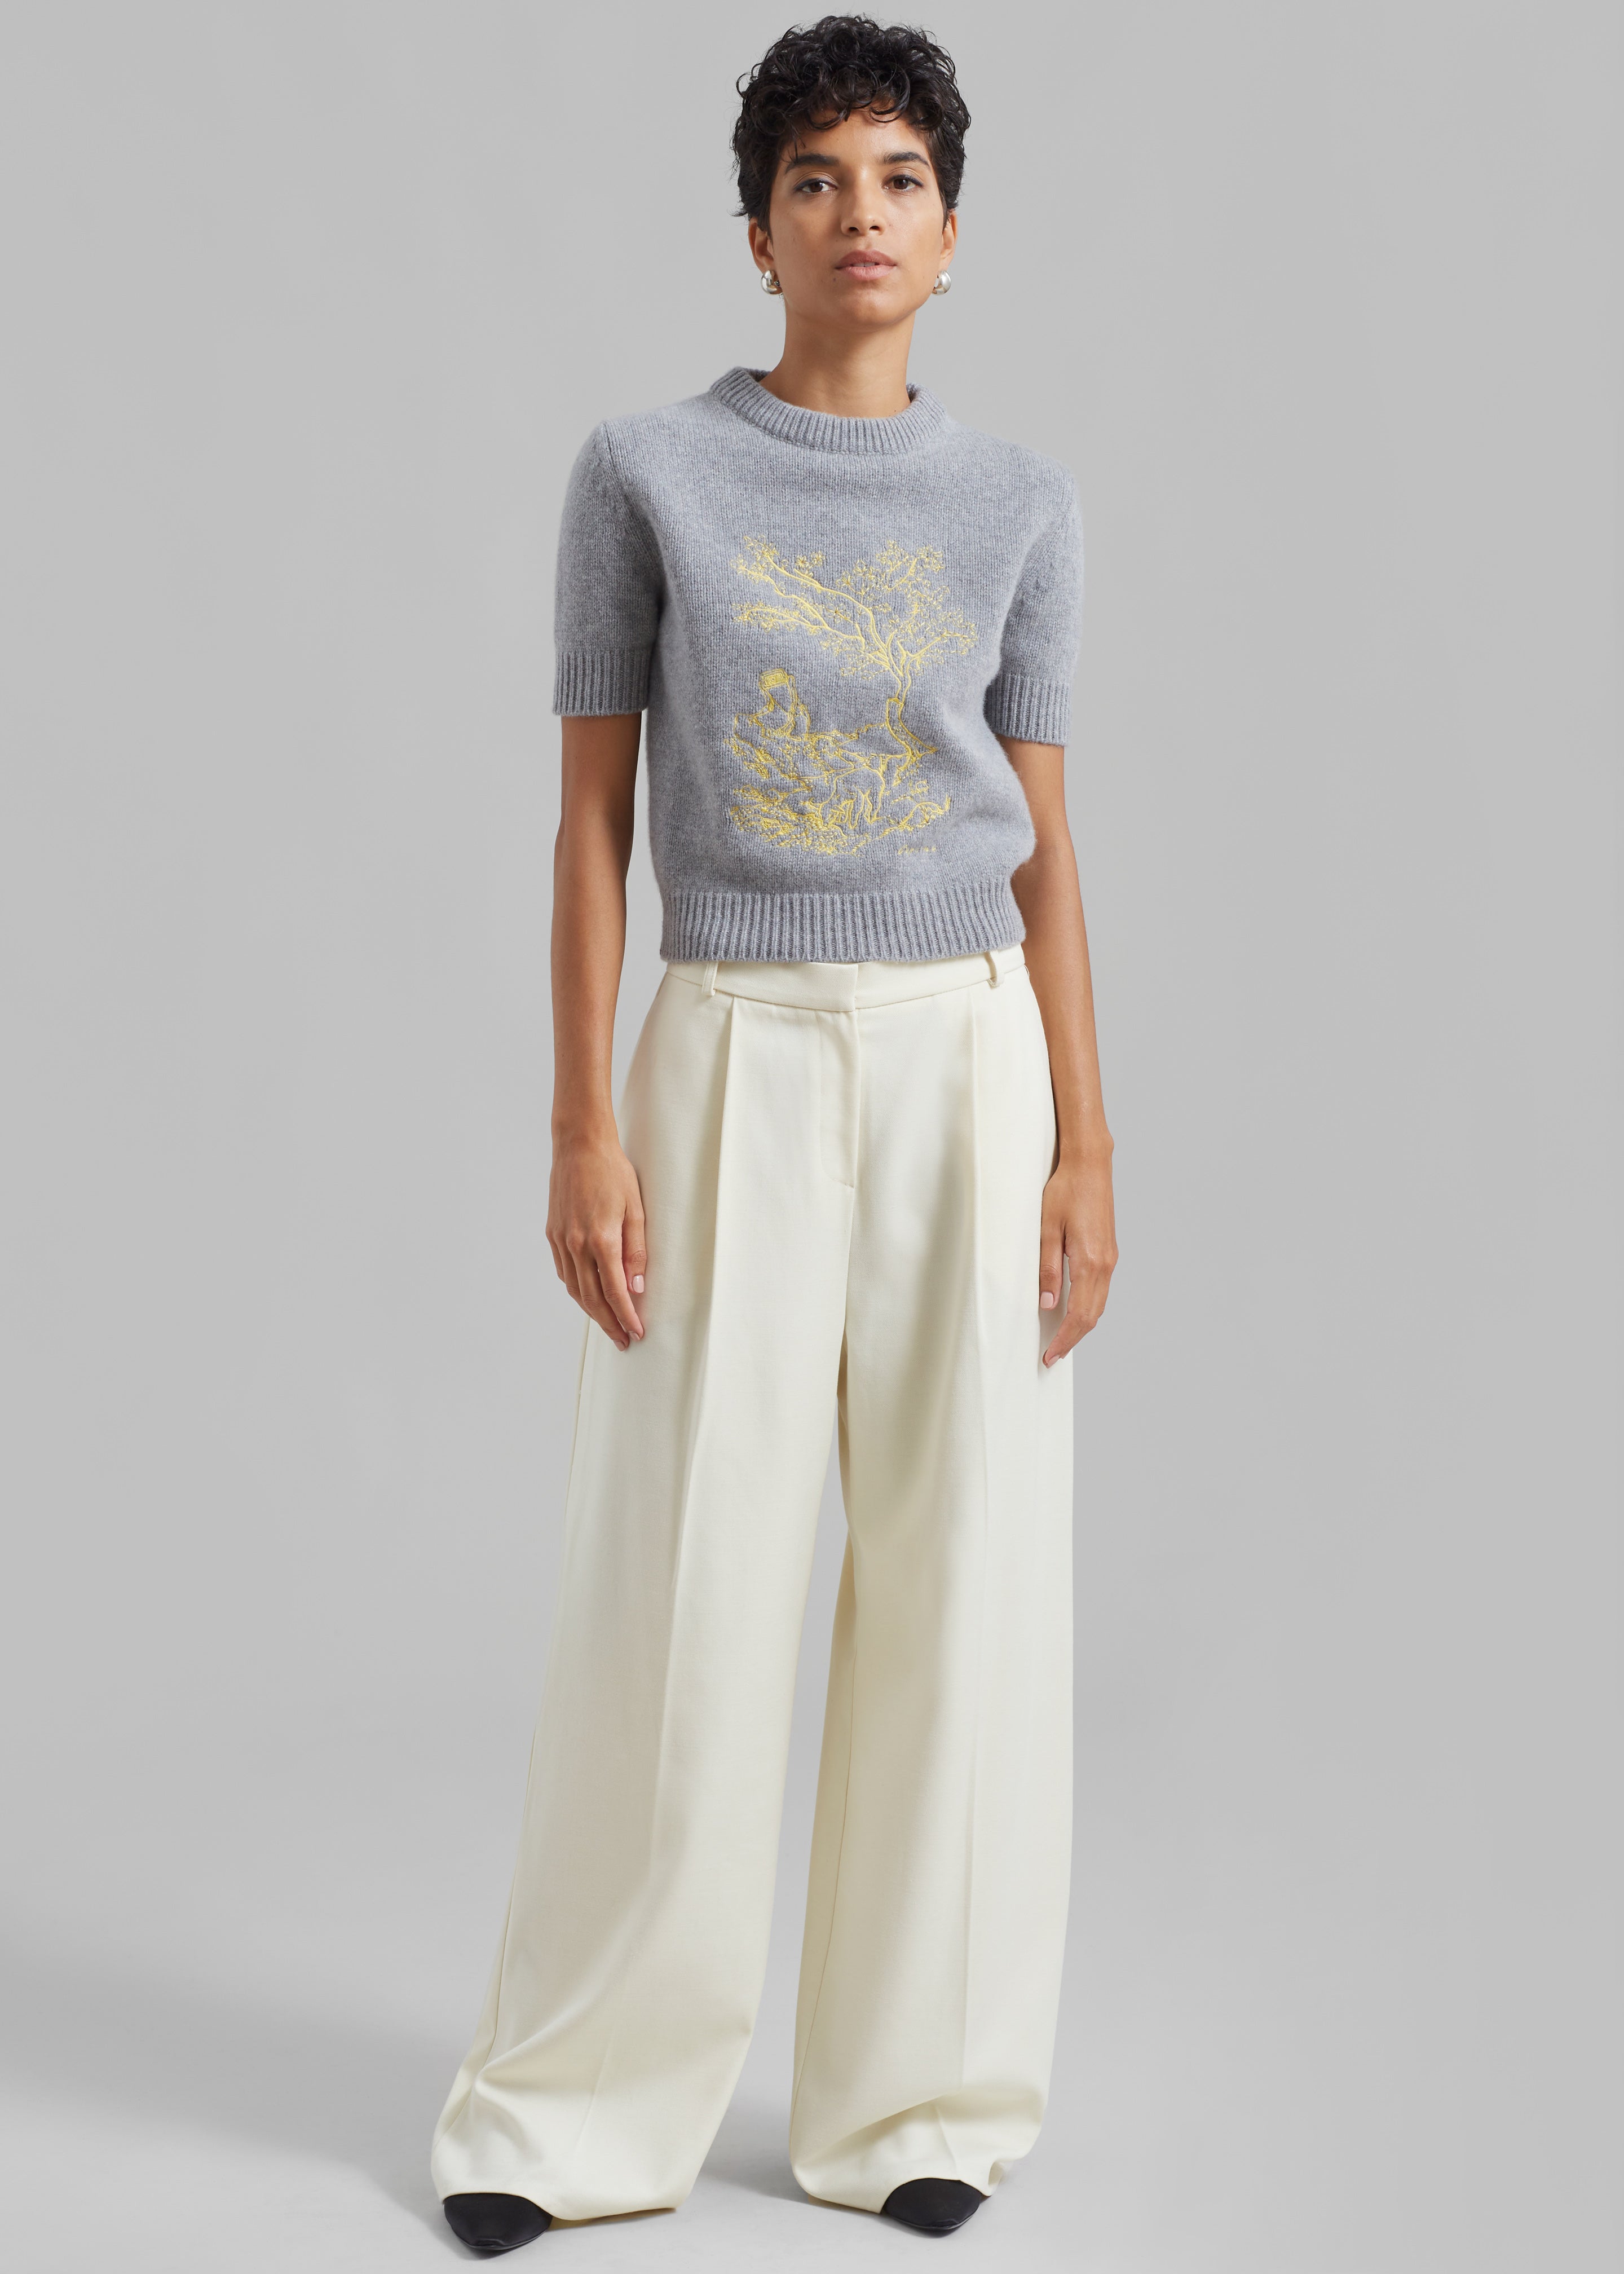 Coperni Cashmere Embroidered Cropped Sweater - Grey - 3